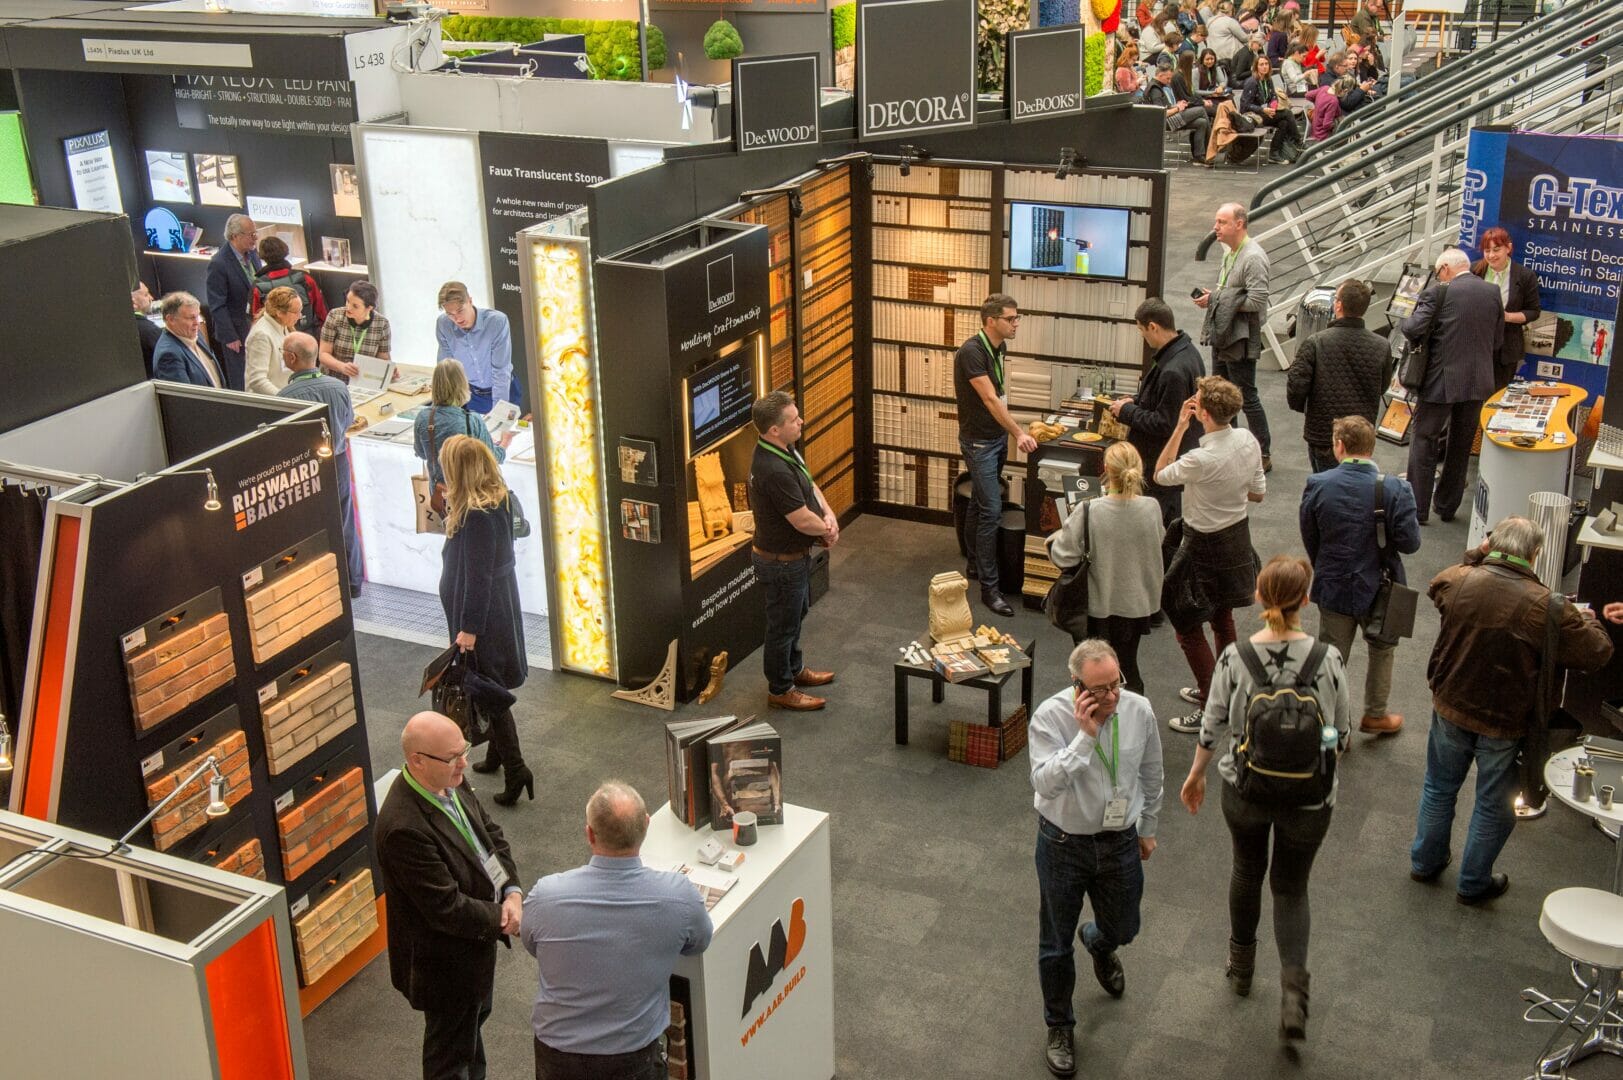 Surface Design Show 2020 – Celebrating 15 years of bringing the best in innovative surface design, manufacturing and development to the UK @surfacethinking